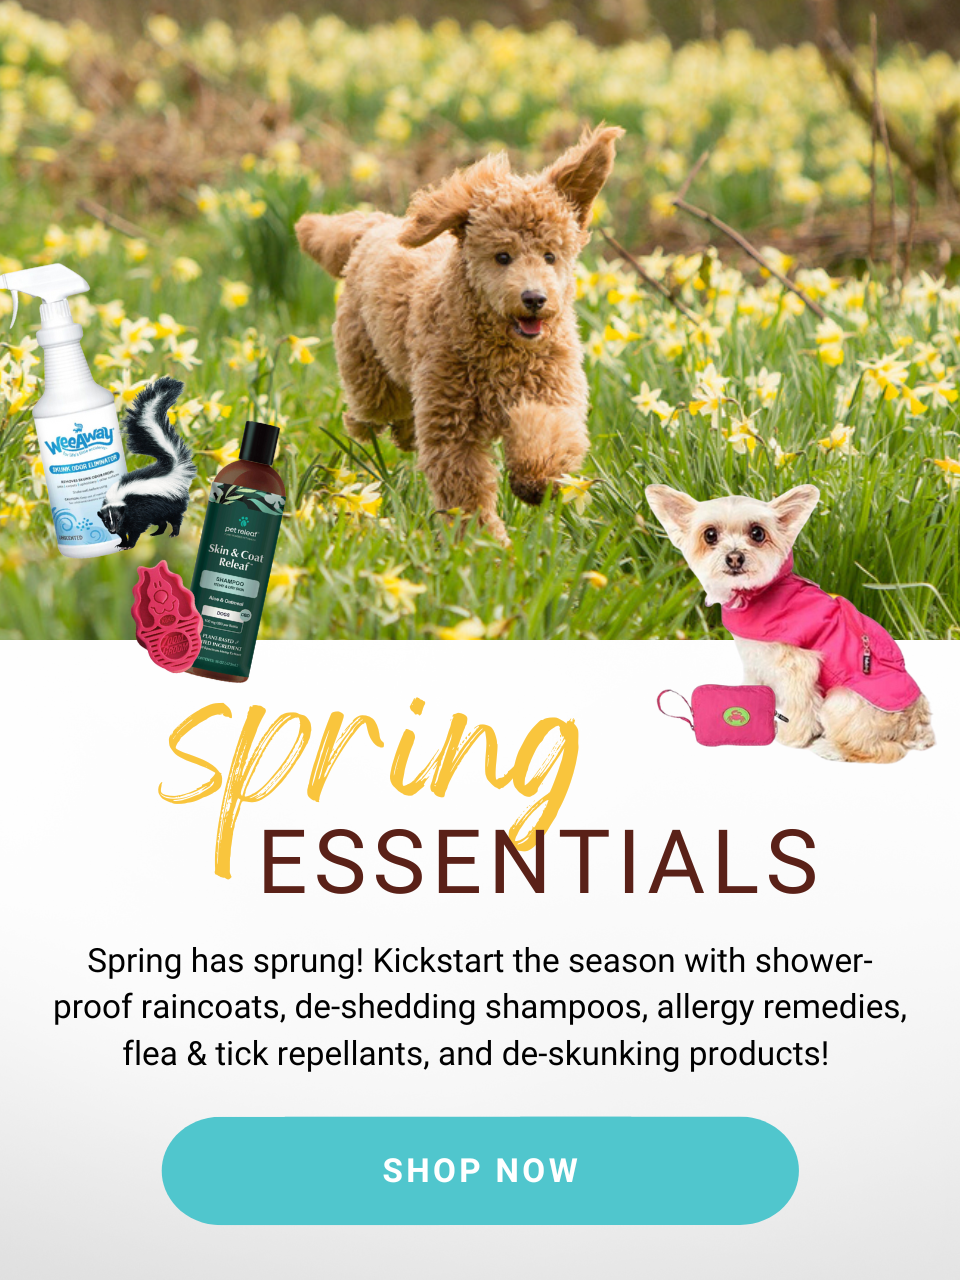 Spring Essentials! Spring has Sprung! Kickstart the season with shower-proof raincoats, de-shedding shampoos, allergy remedies, flea & tick repellants, and de-skunking products!! Shop Now!